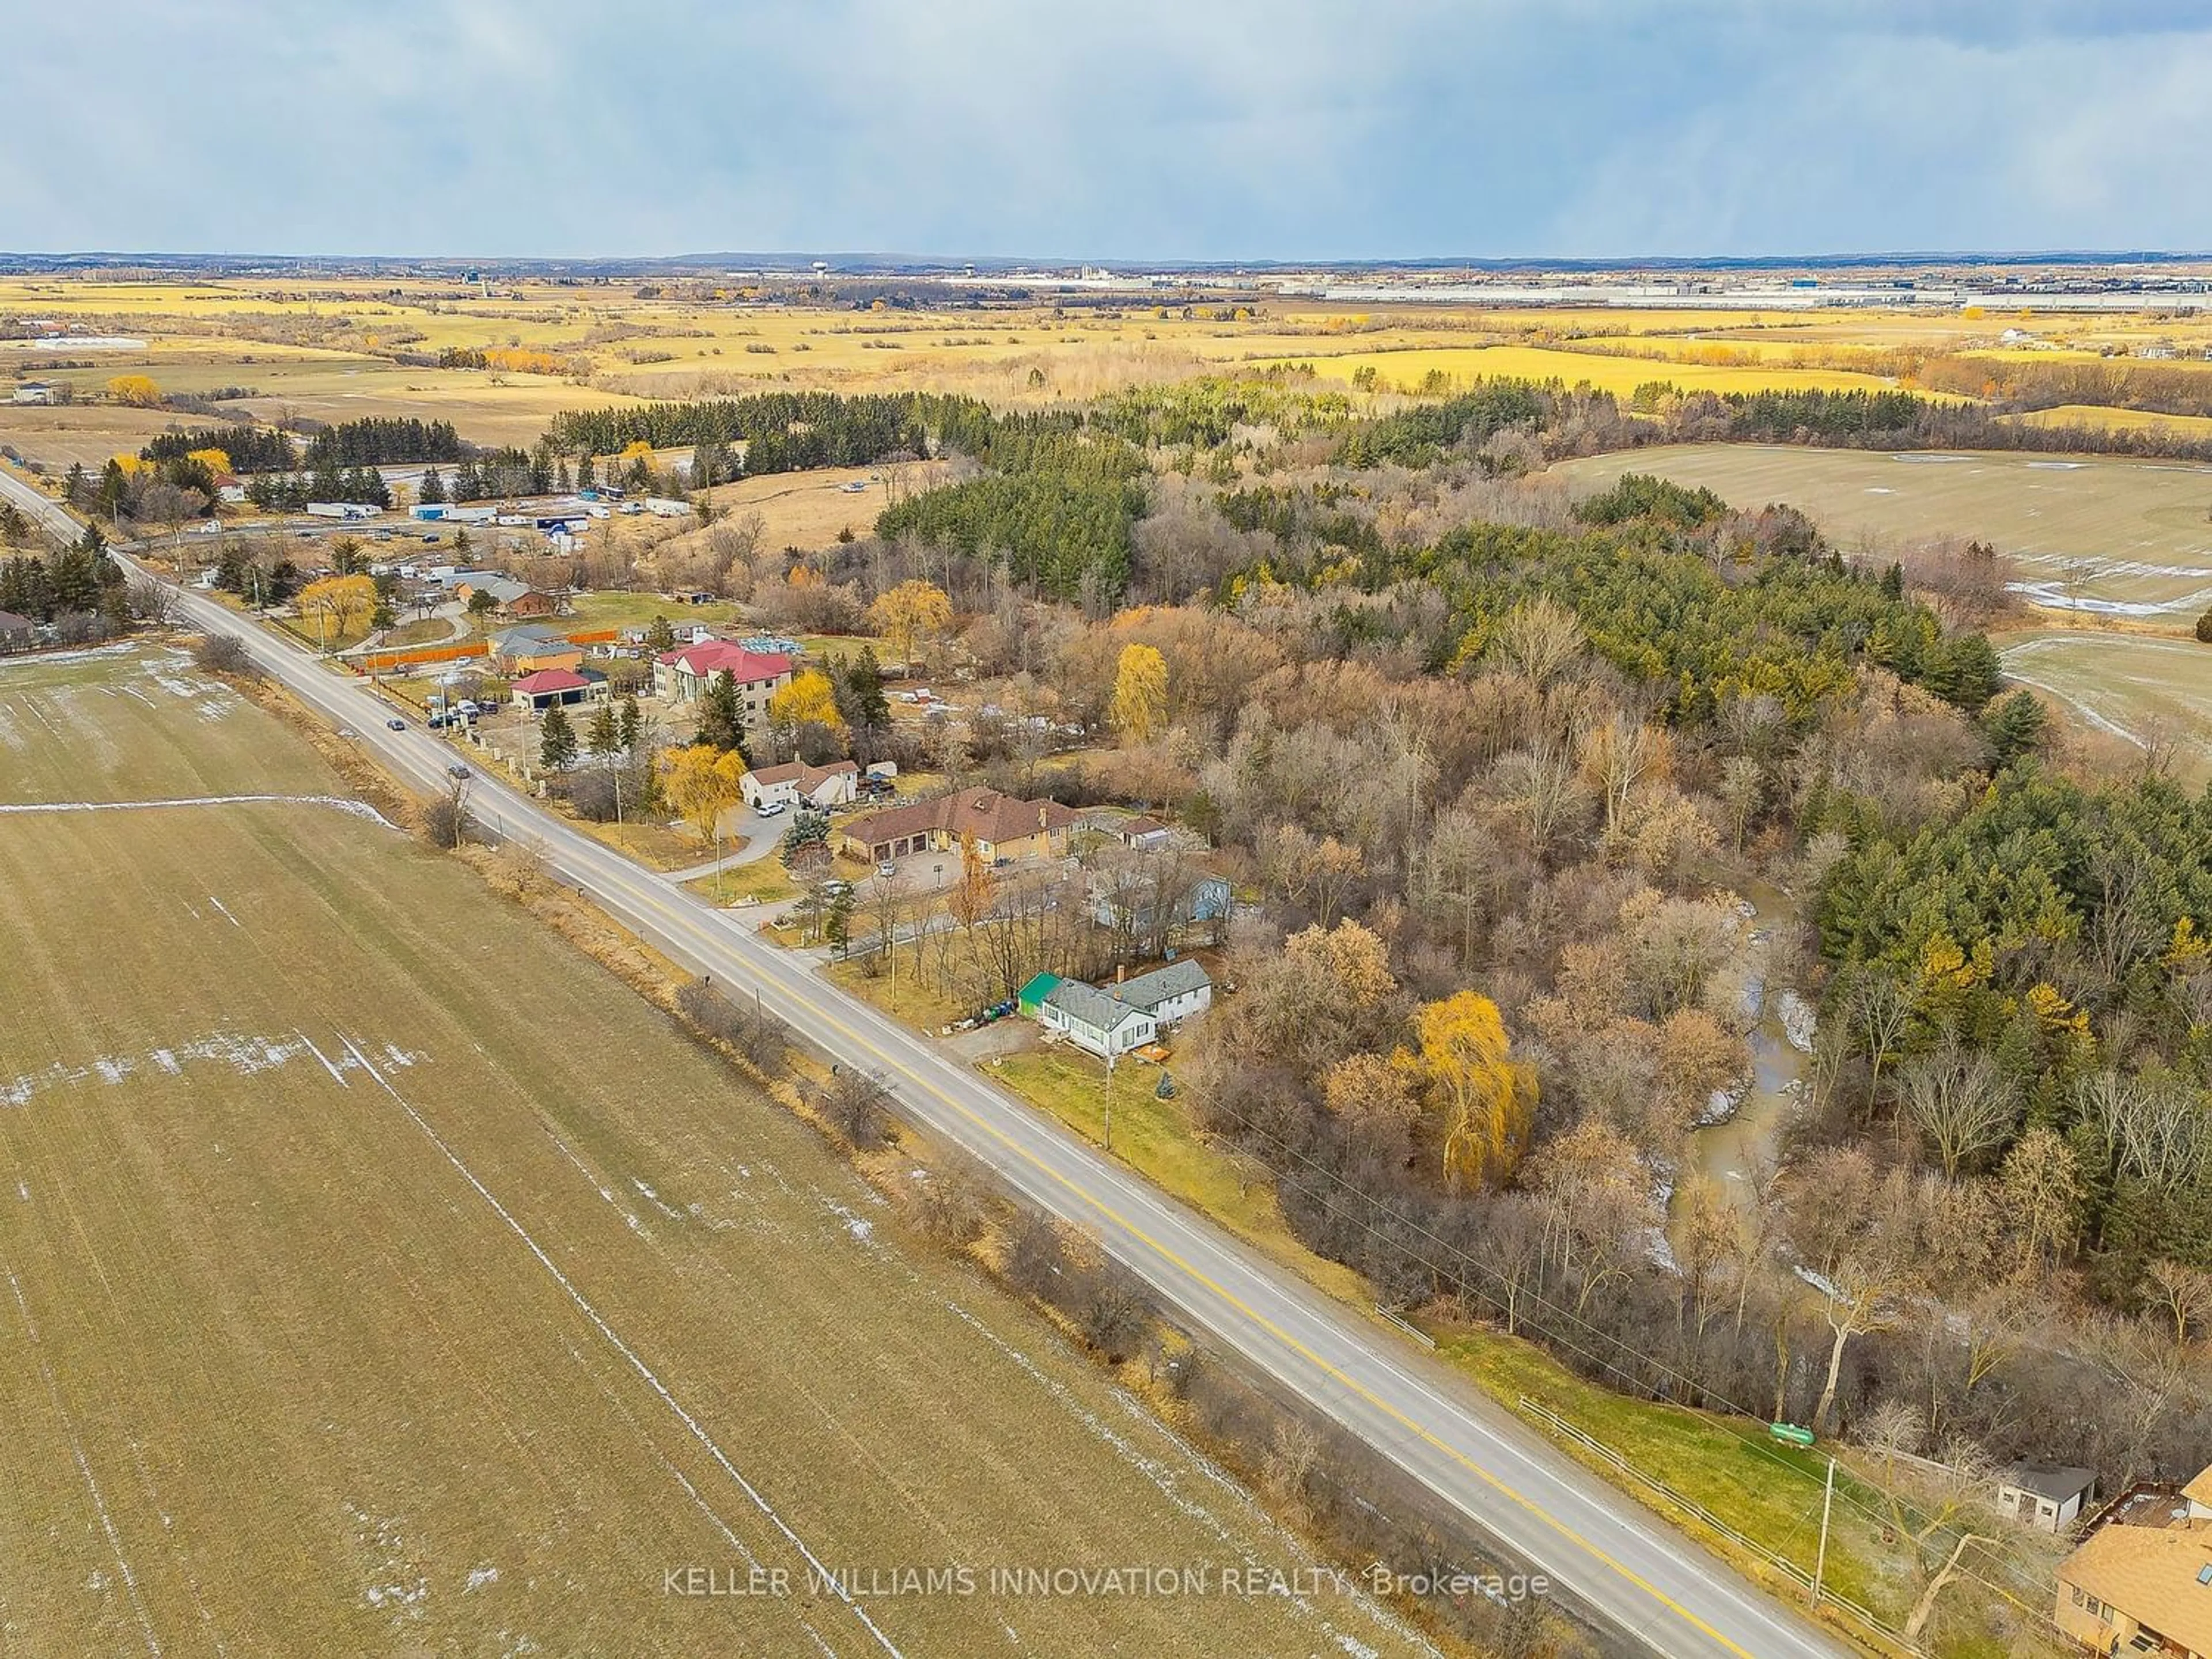 Lakeview for 12109 The Gore Rd, Caledon Ontario L7E 0W5